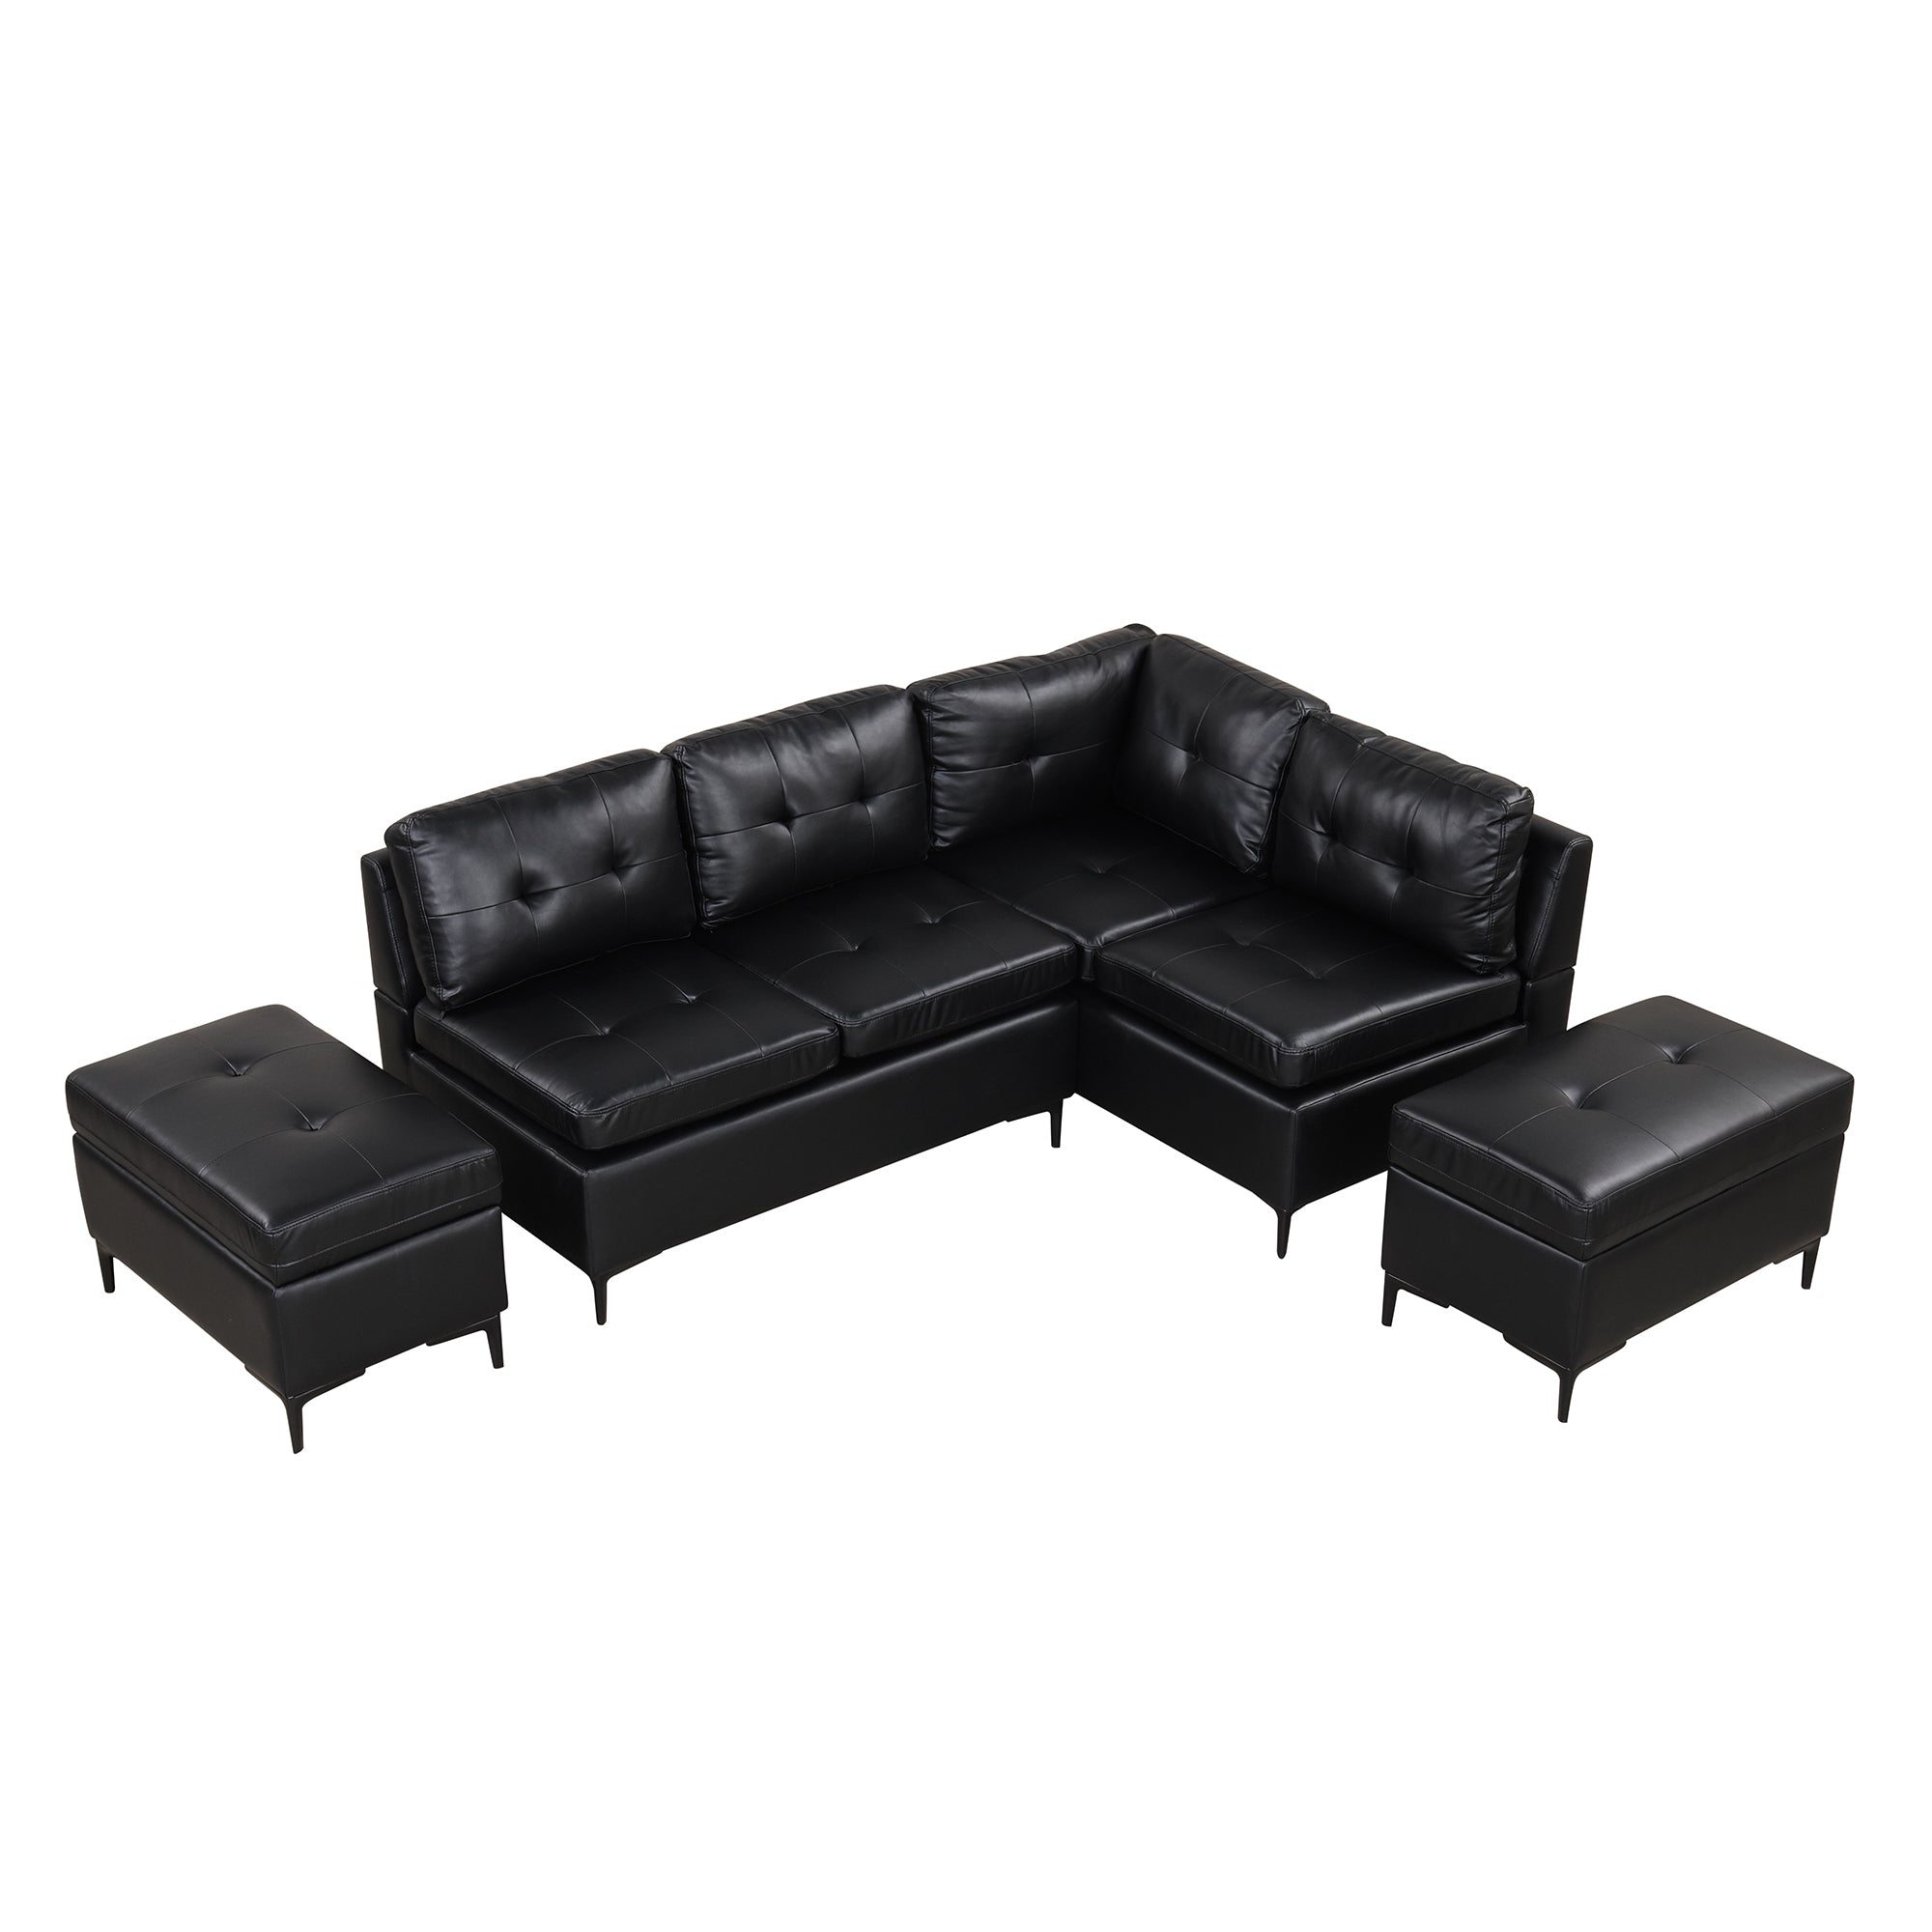 94.88" Black PU Leather L-Shaped Sectional Sofa with Storage Ottomans-Stationary Sectionals-American Furniture Outlet